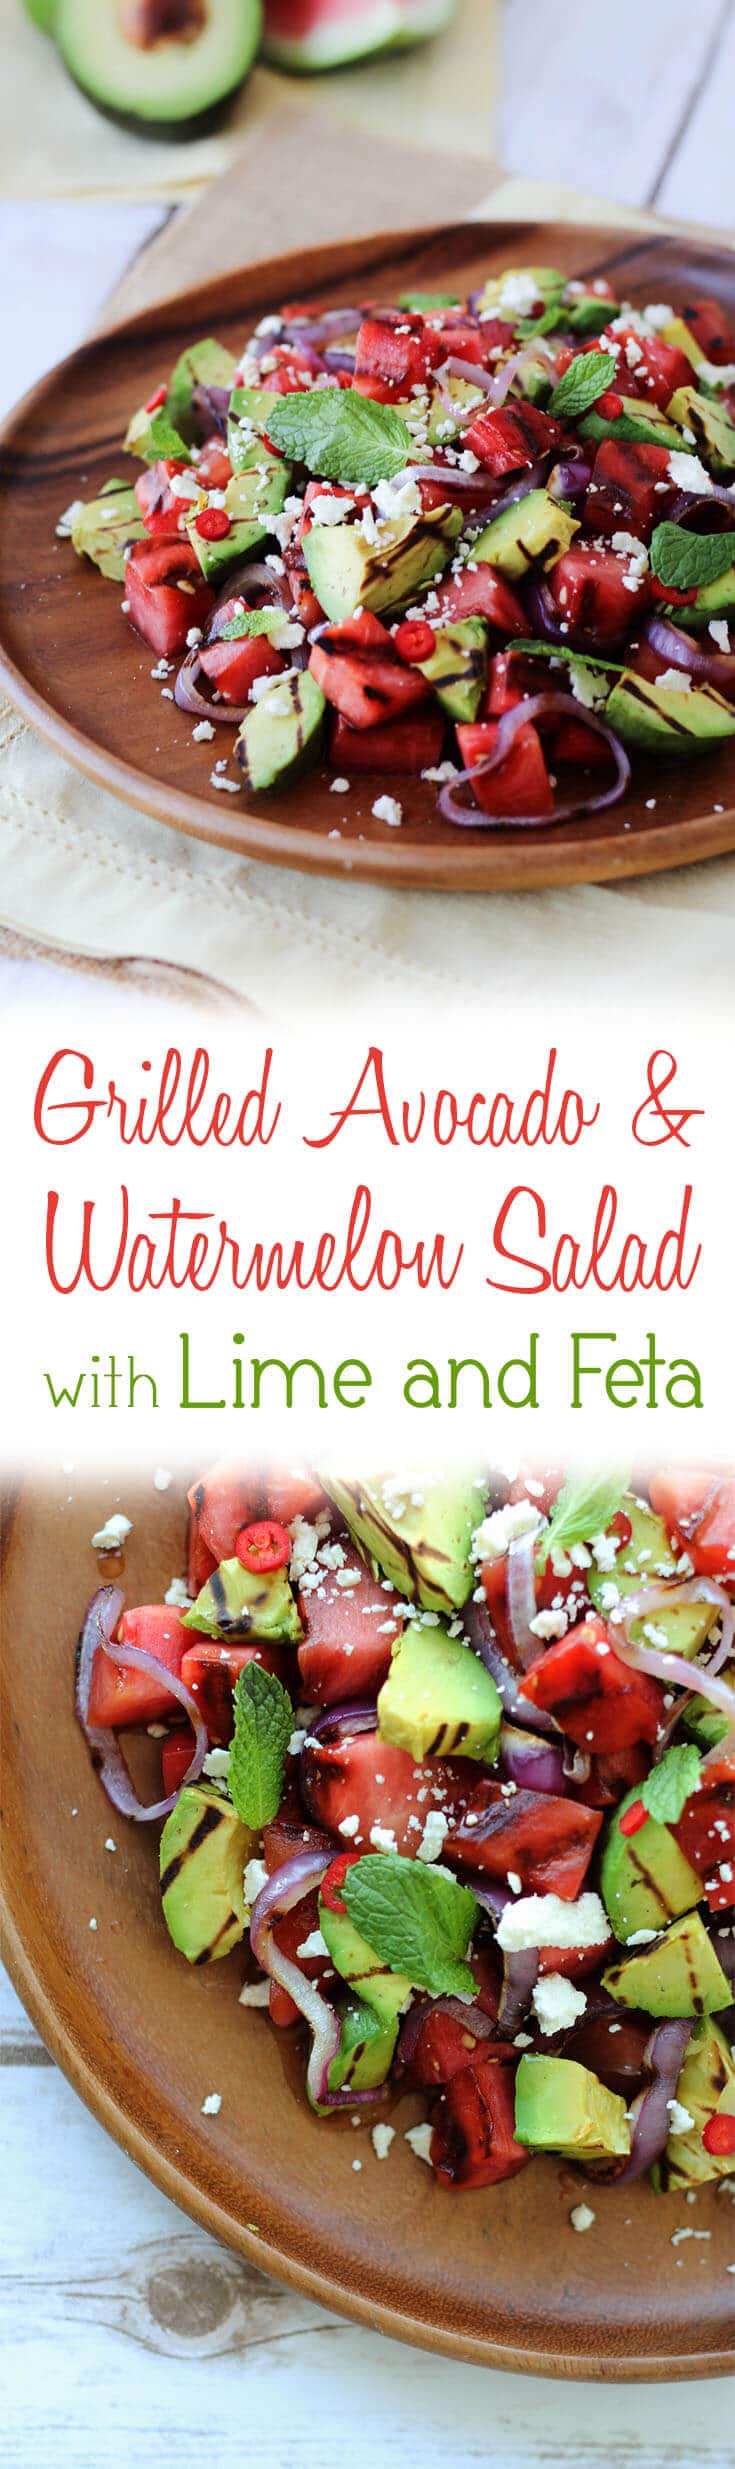 pinterest image of grilled avocado and watermelon salad topped with lime and feta with text overlay